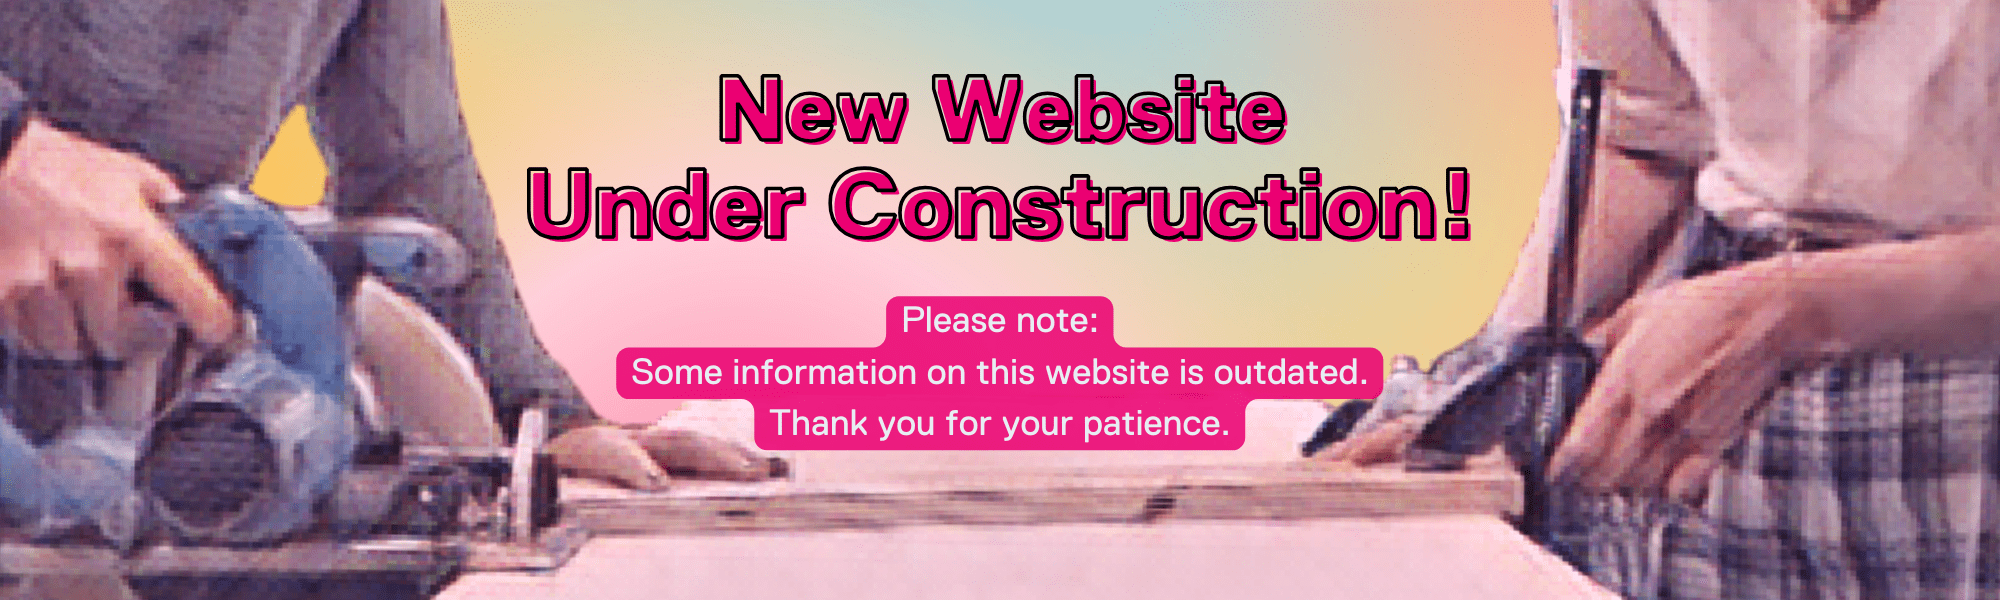 New Website under construction! Please note: Some information in this website is outdated. Thank you for your patience. 